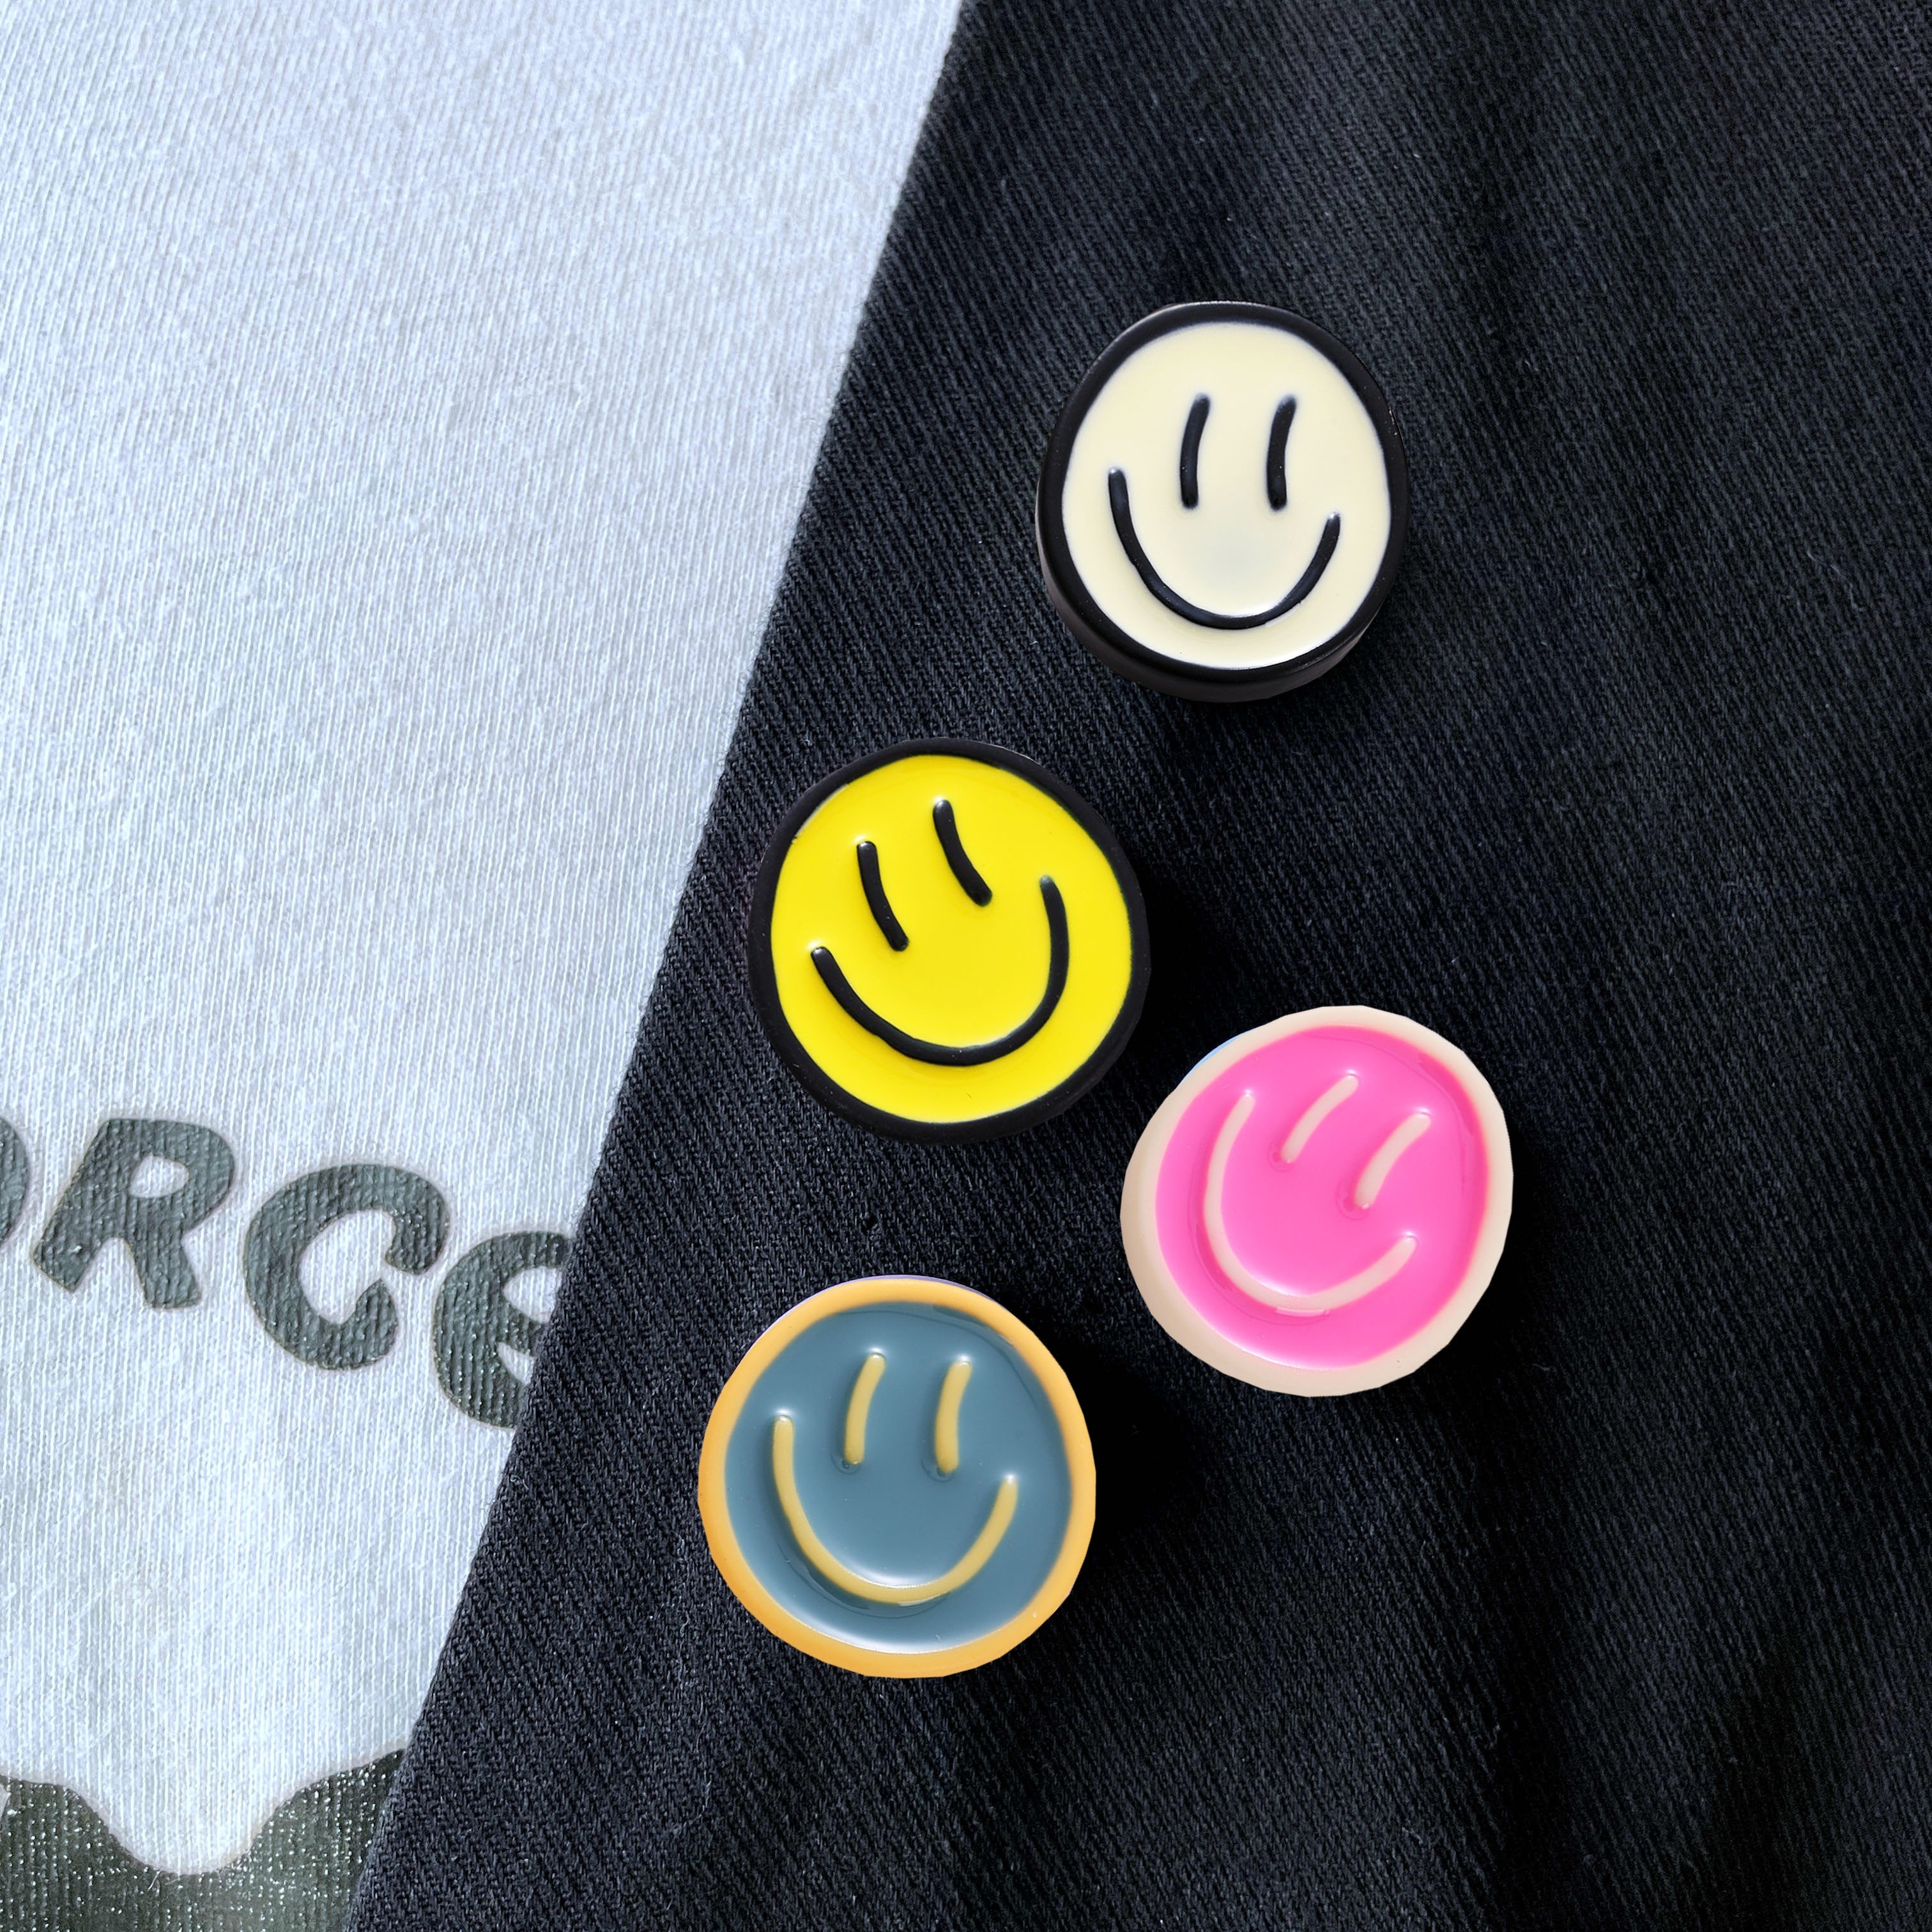 

1pc Coquette Style Brooch Trendy Smiling Face Design Multi Colors For U To Choose Pick 1 U Prefer Sweet Backpack/ Jeans/ Shirt Decor